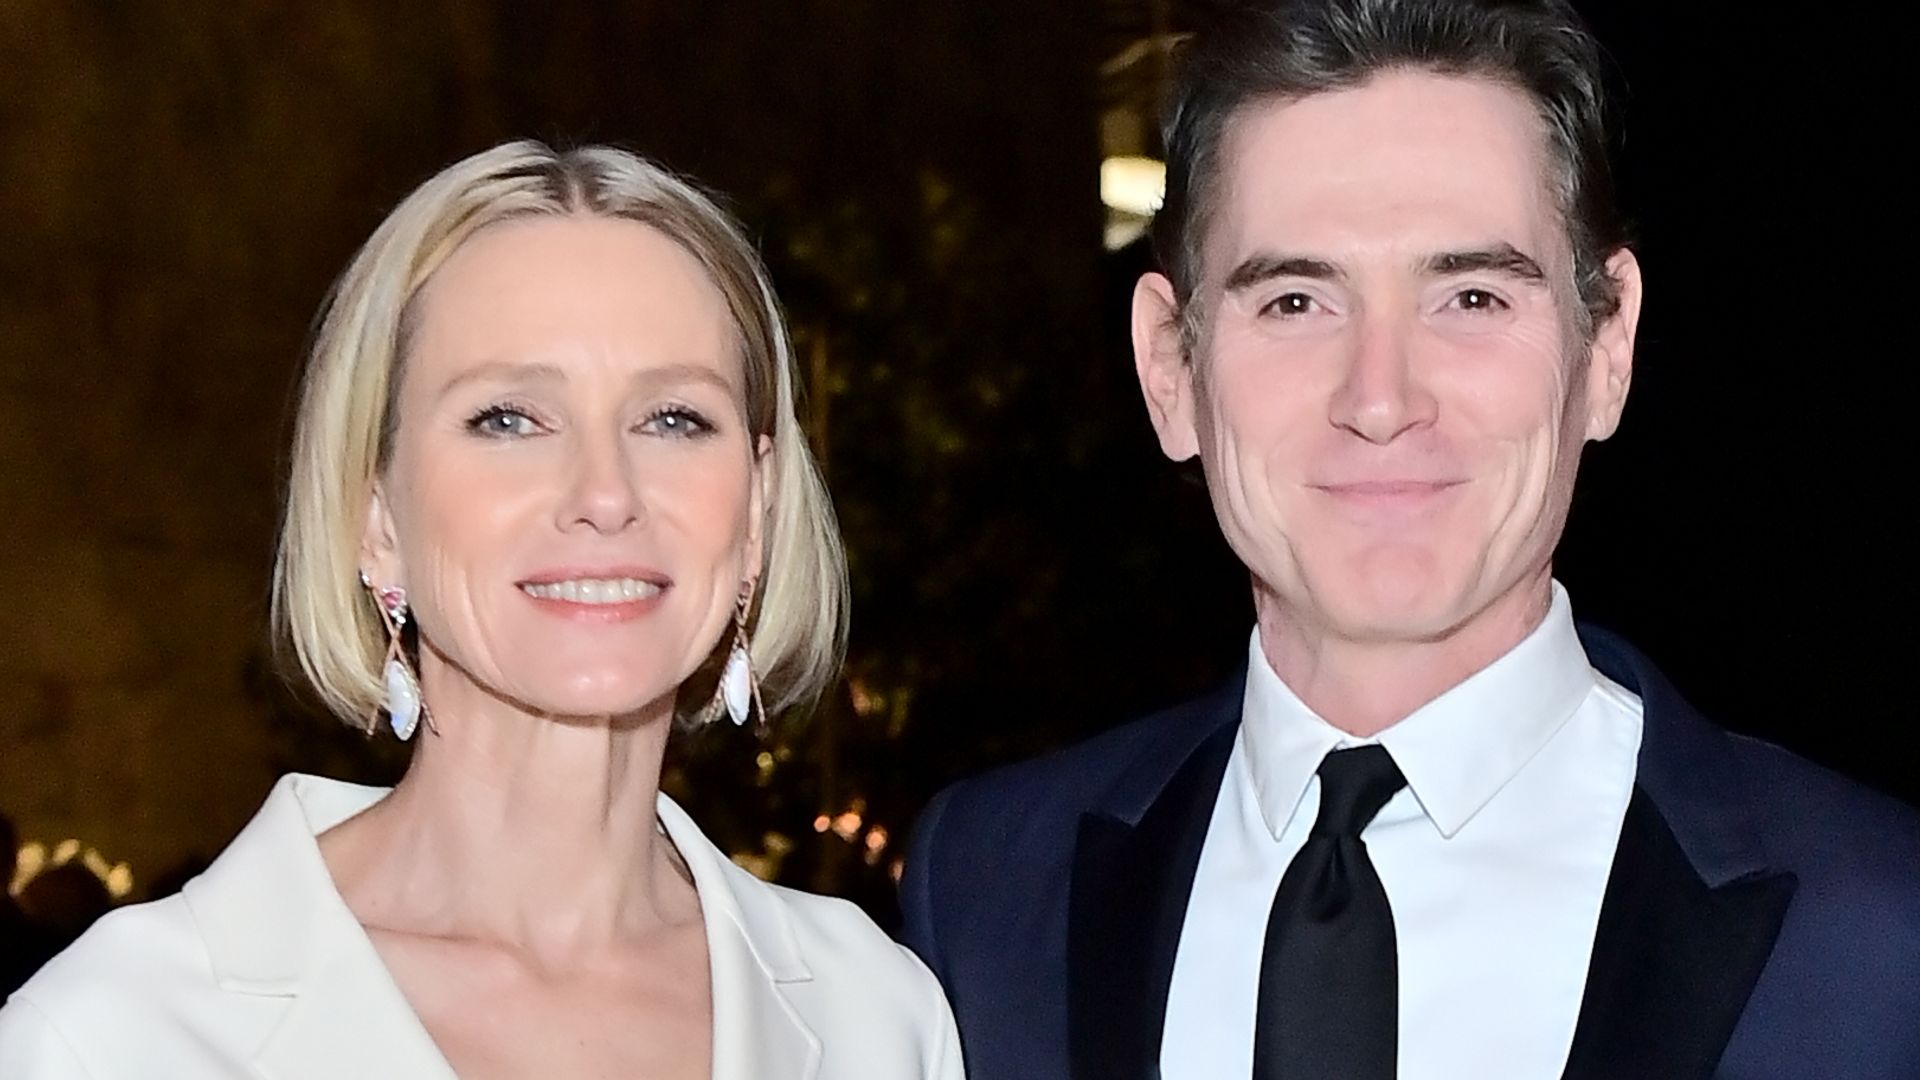 Naomi Watts in a white suit and Billy Crudup in a blue suit at ELLE's 29th Annual Women in Hollywood celebration